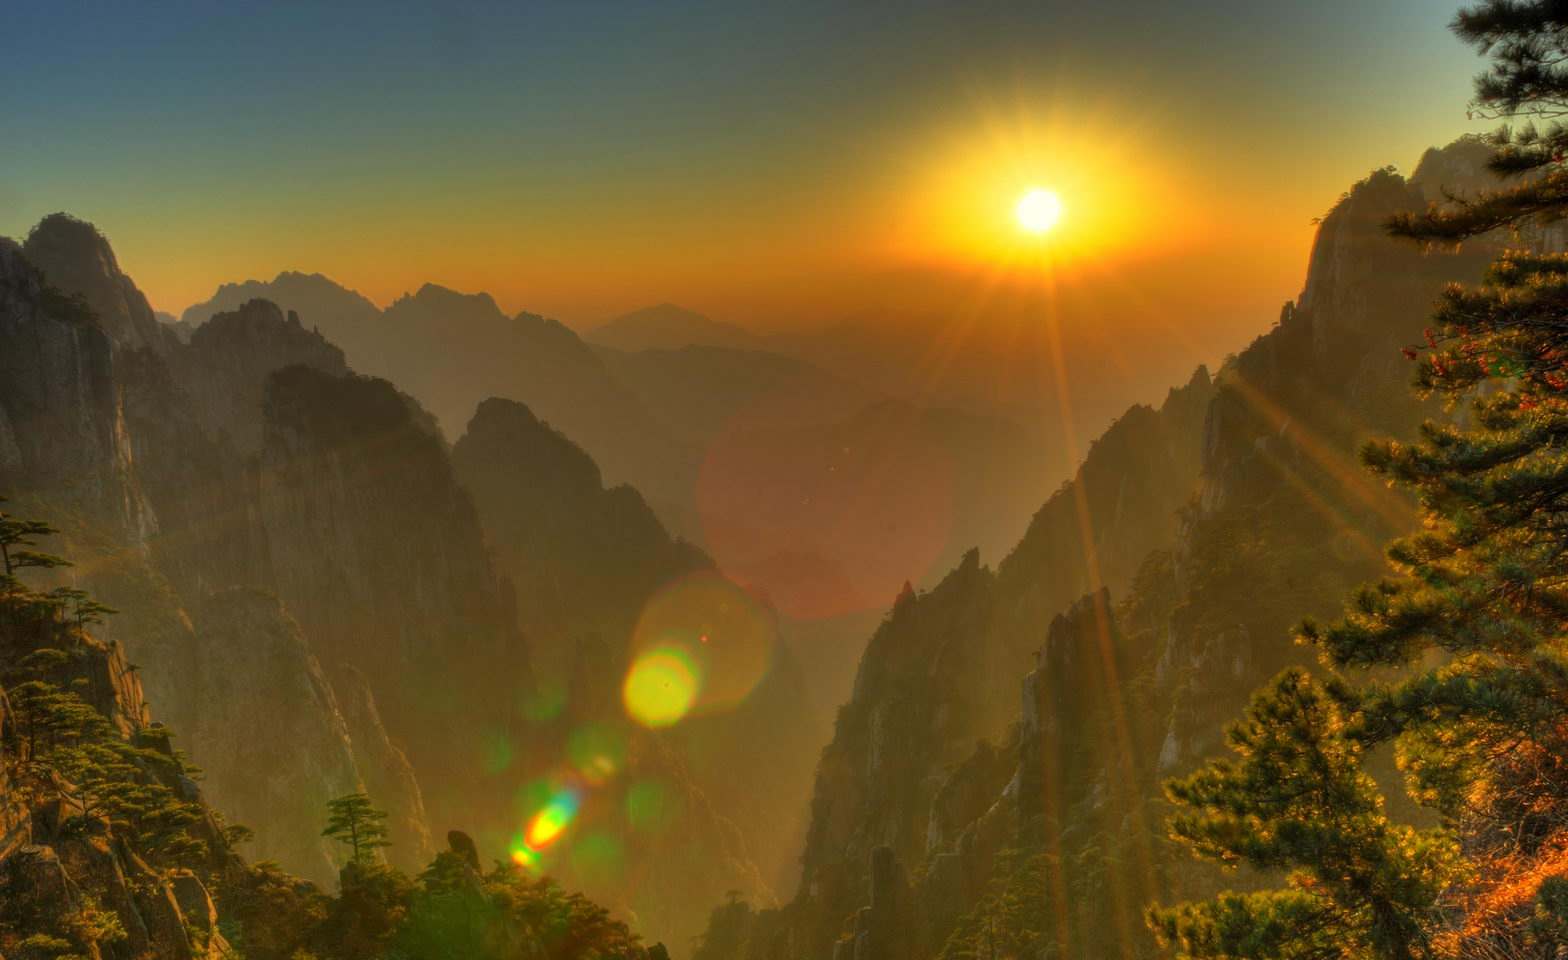 3-Day_Beijing_Huangshan_Sightseeing_Tour_with_Round-trip_High-speed_Train_5.jpg